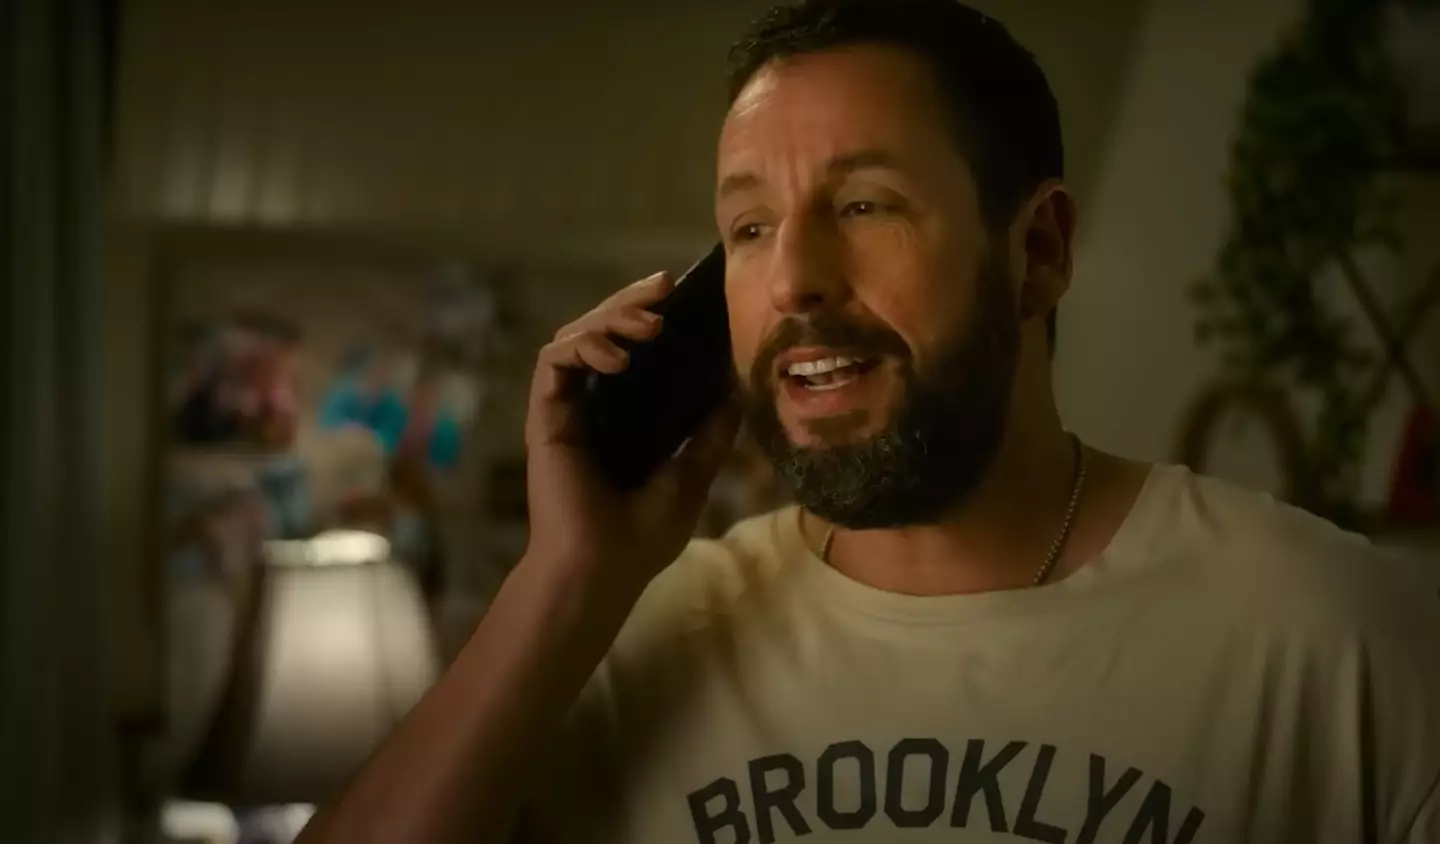 Adam Sandler is working with his daughters on a new Netflix movie.